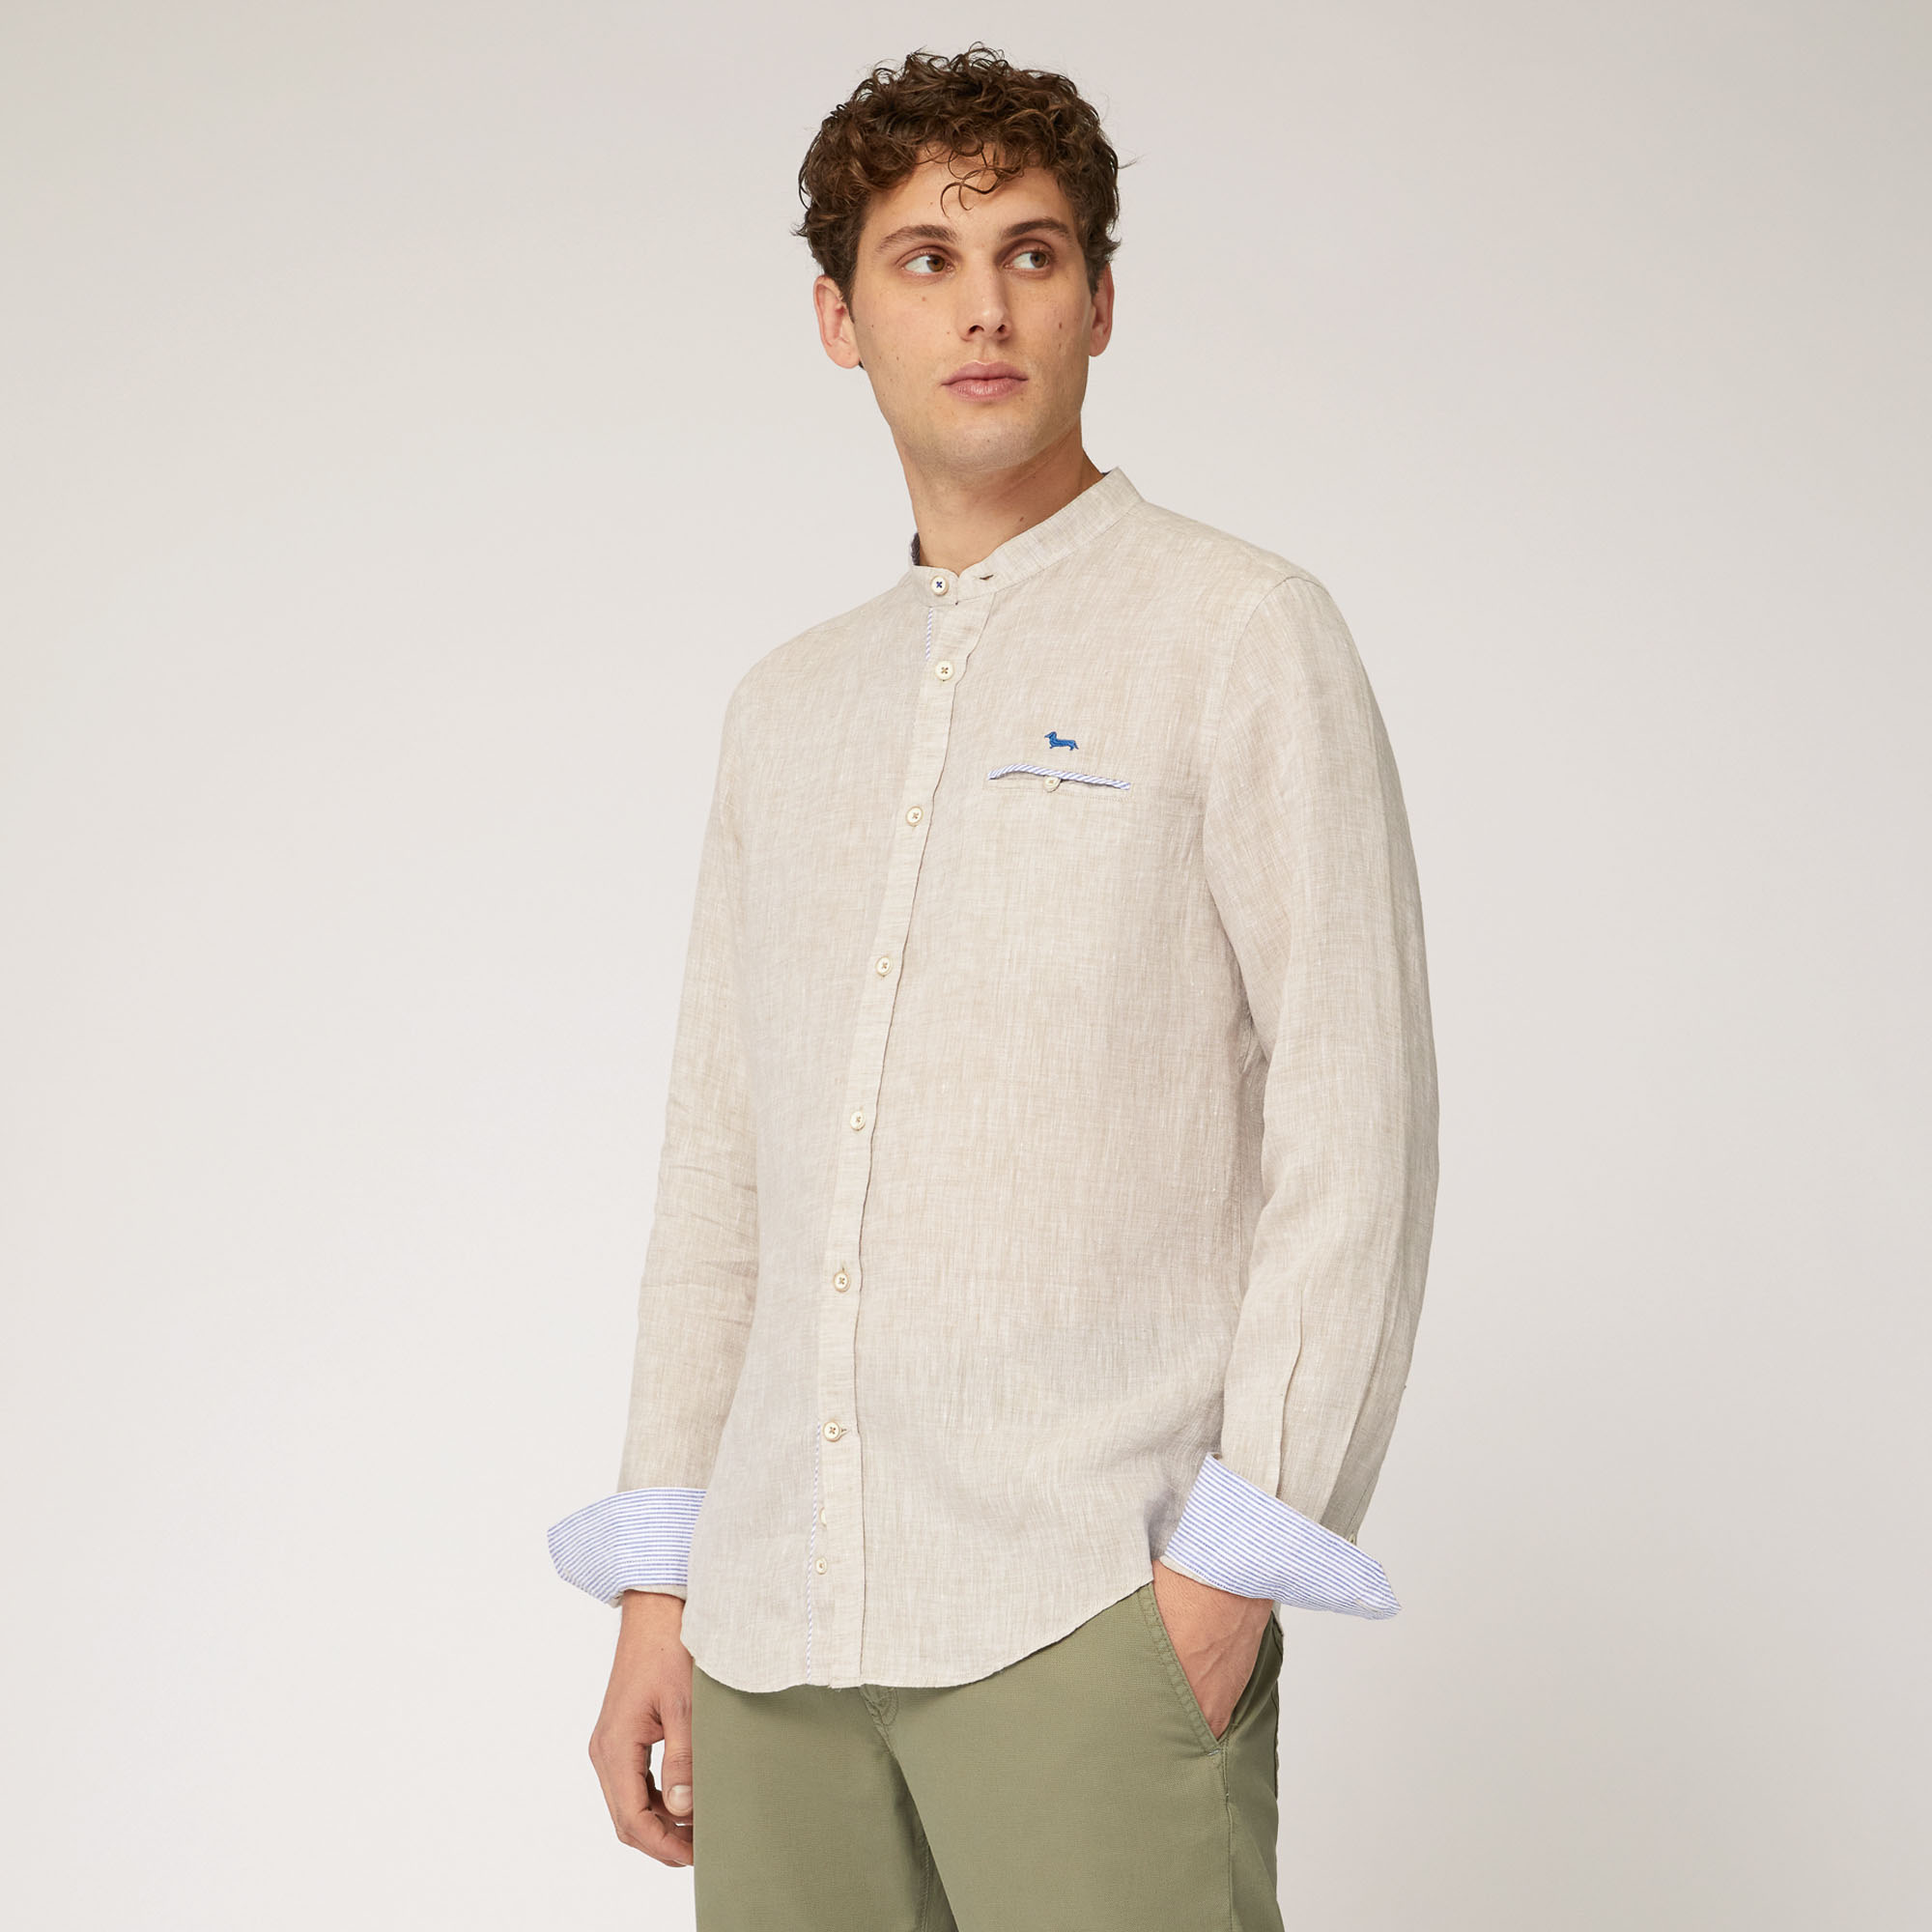 Linen Shirt with Mandarin Collar and Breast Pocket, Beige, large